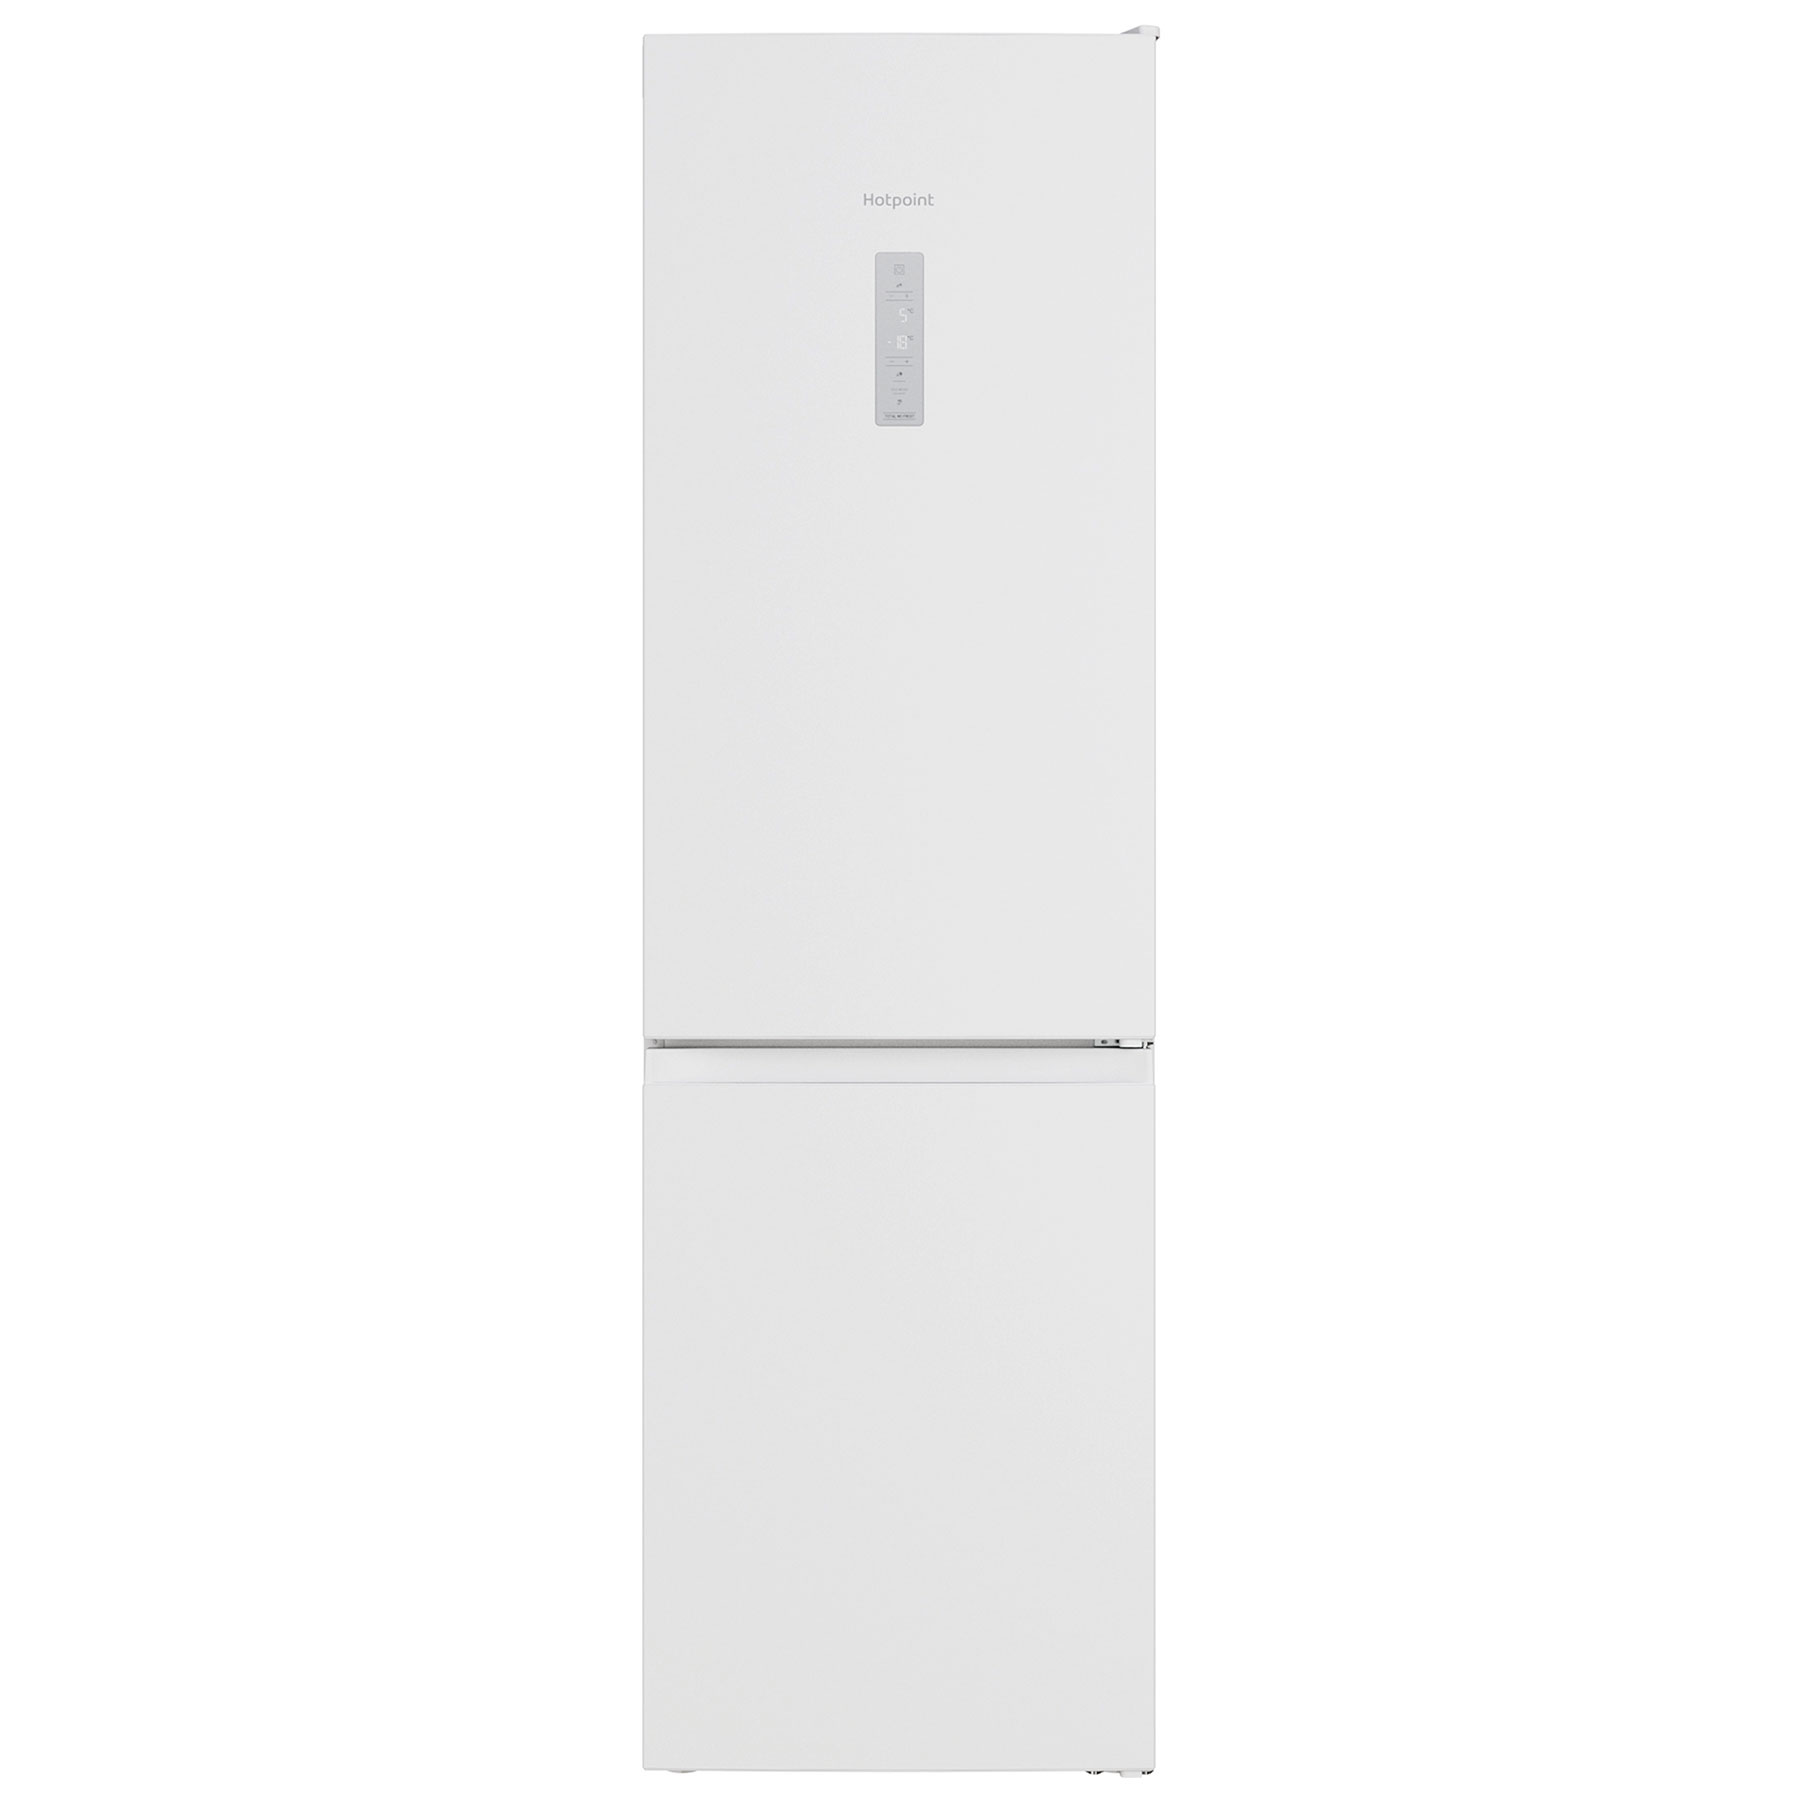 Hotpoint H7X93TWM 60cm Frost Free Fridge Freezer in White 2 03m D Rate